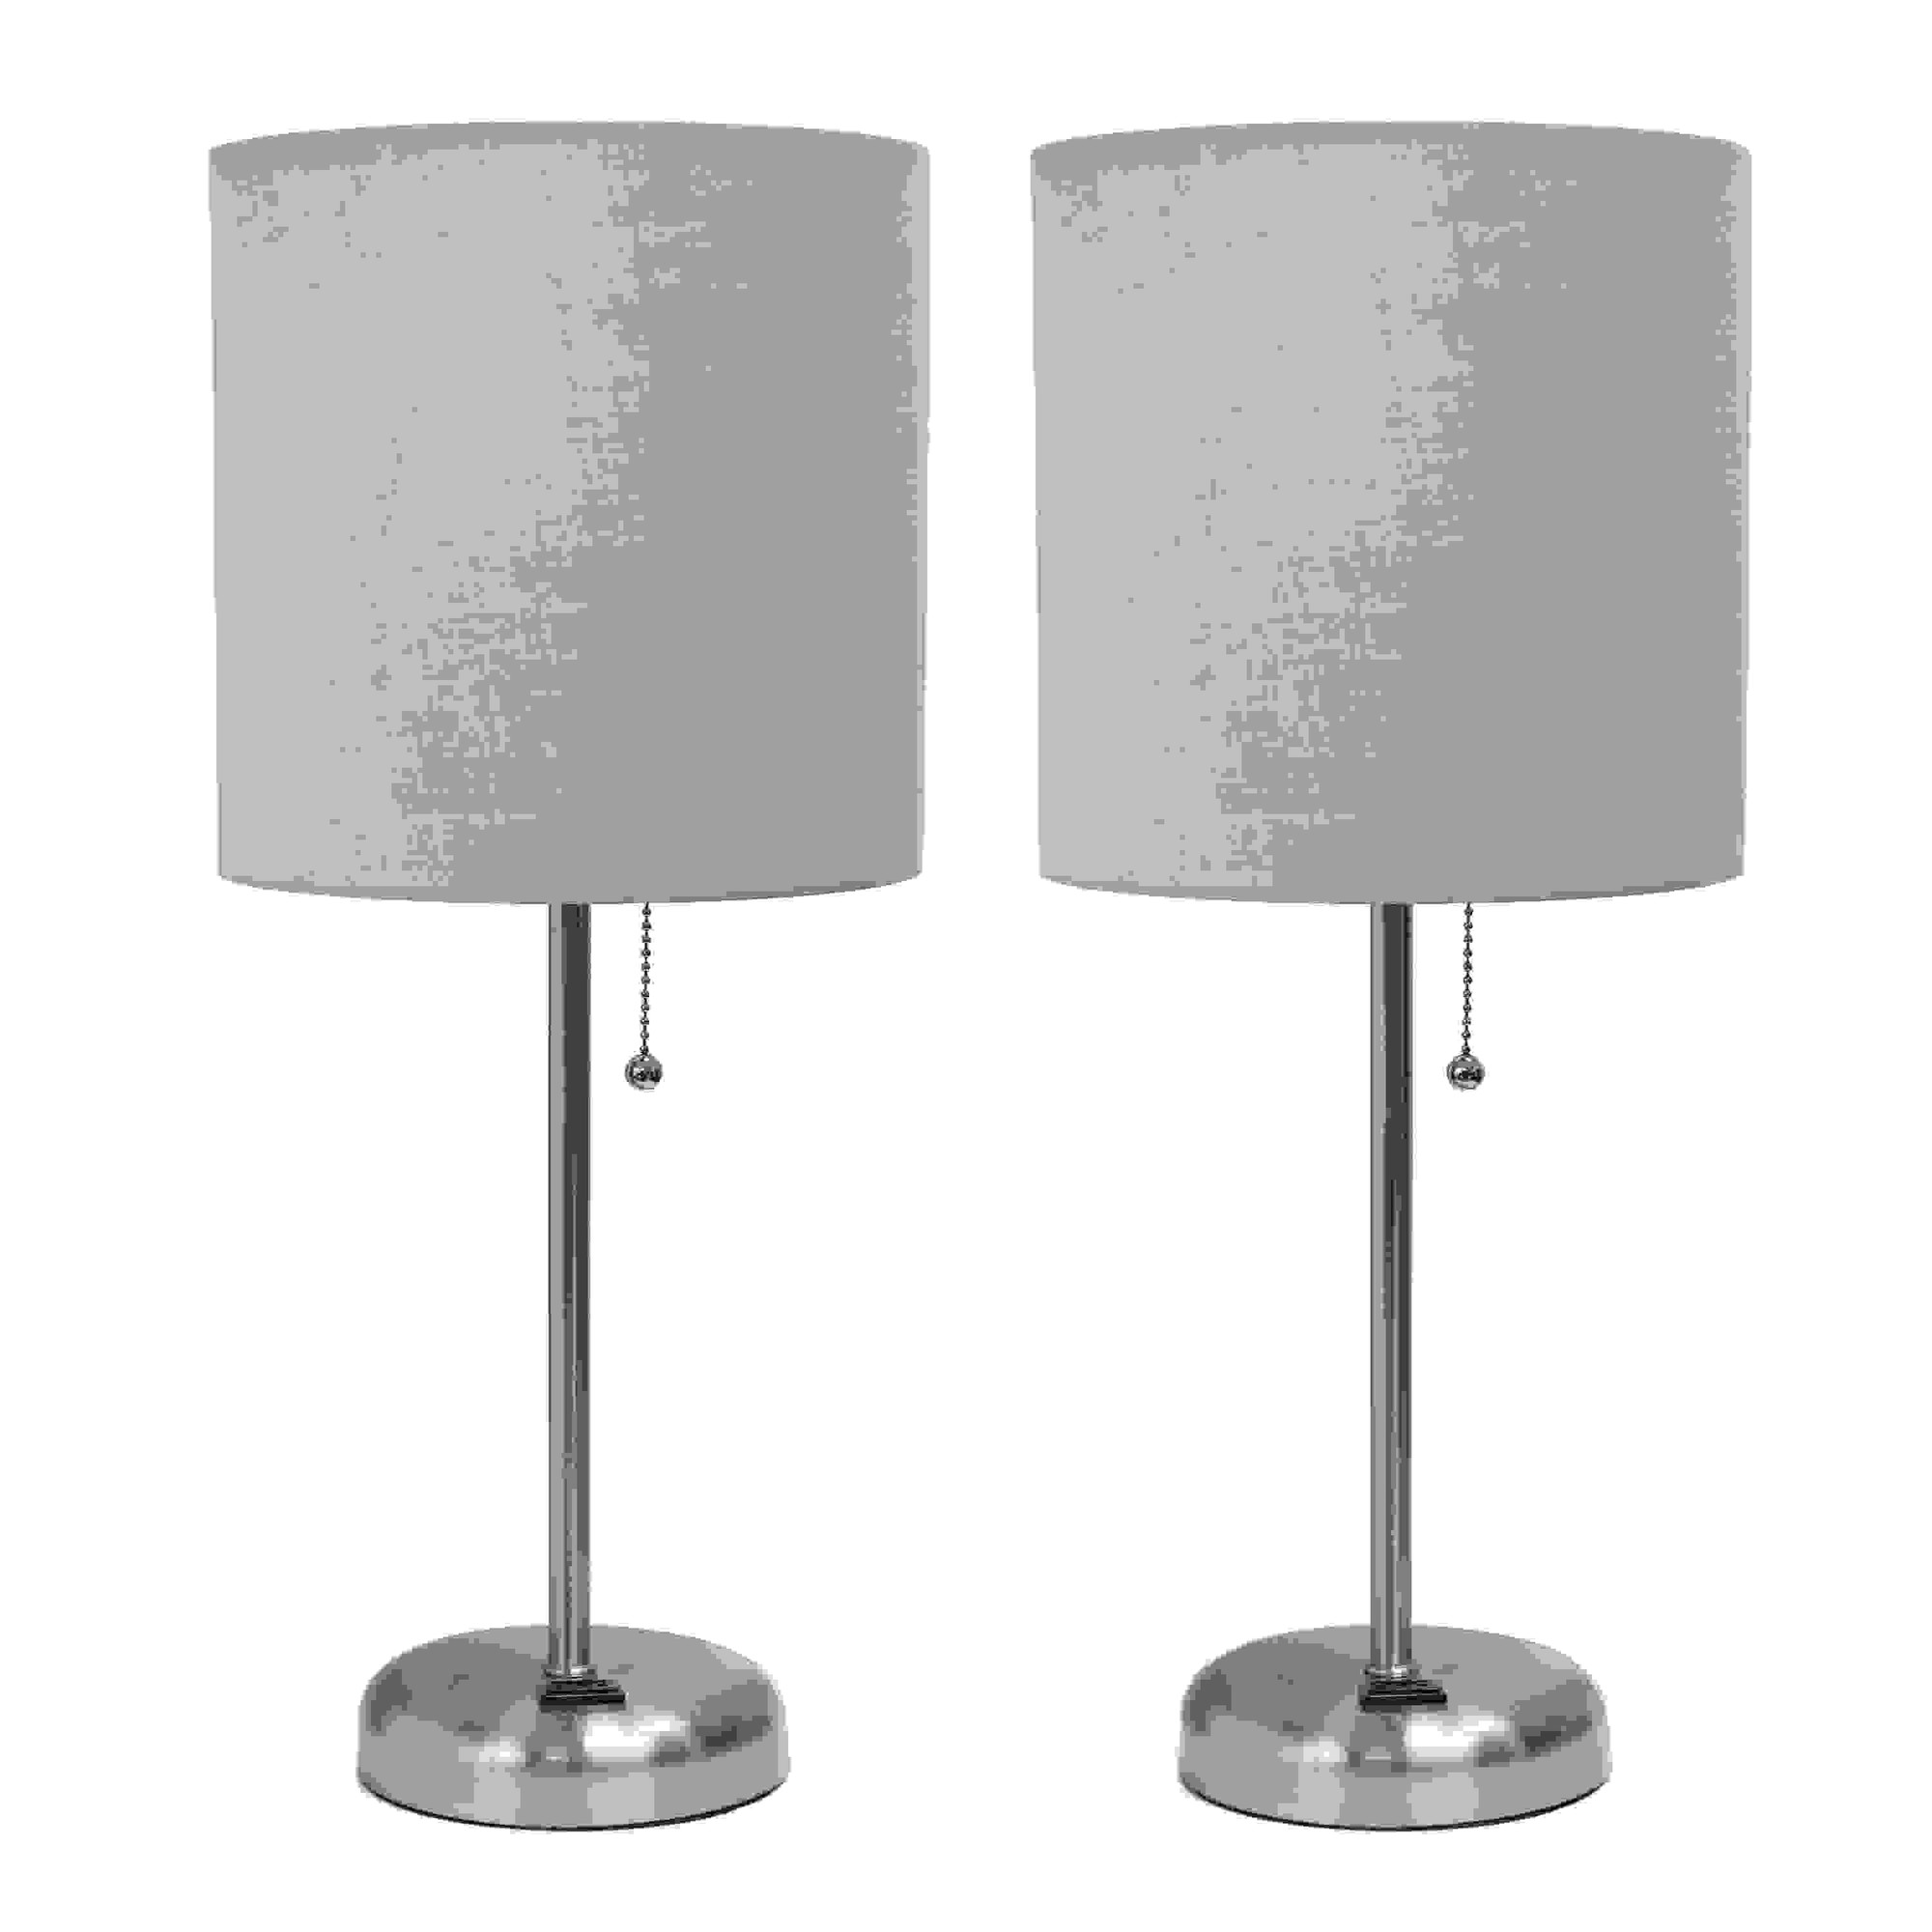 Simple Designs Brushed Steel Stick Lamp with Charging Outlet and Fabric Shade 2 Pack Set, Gray